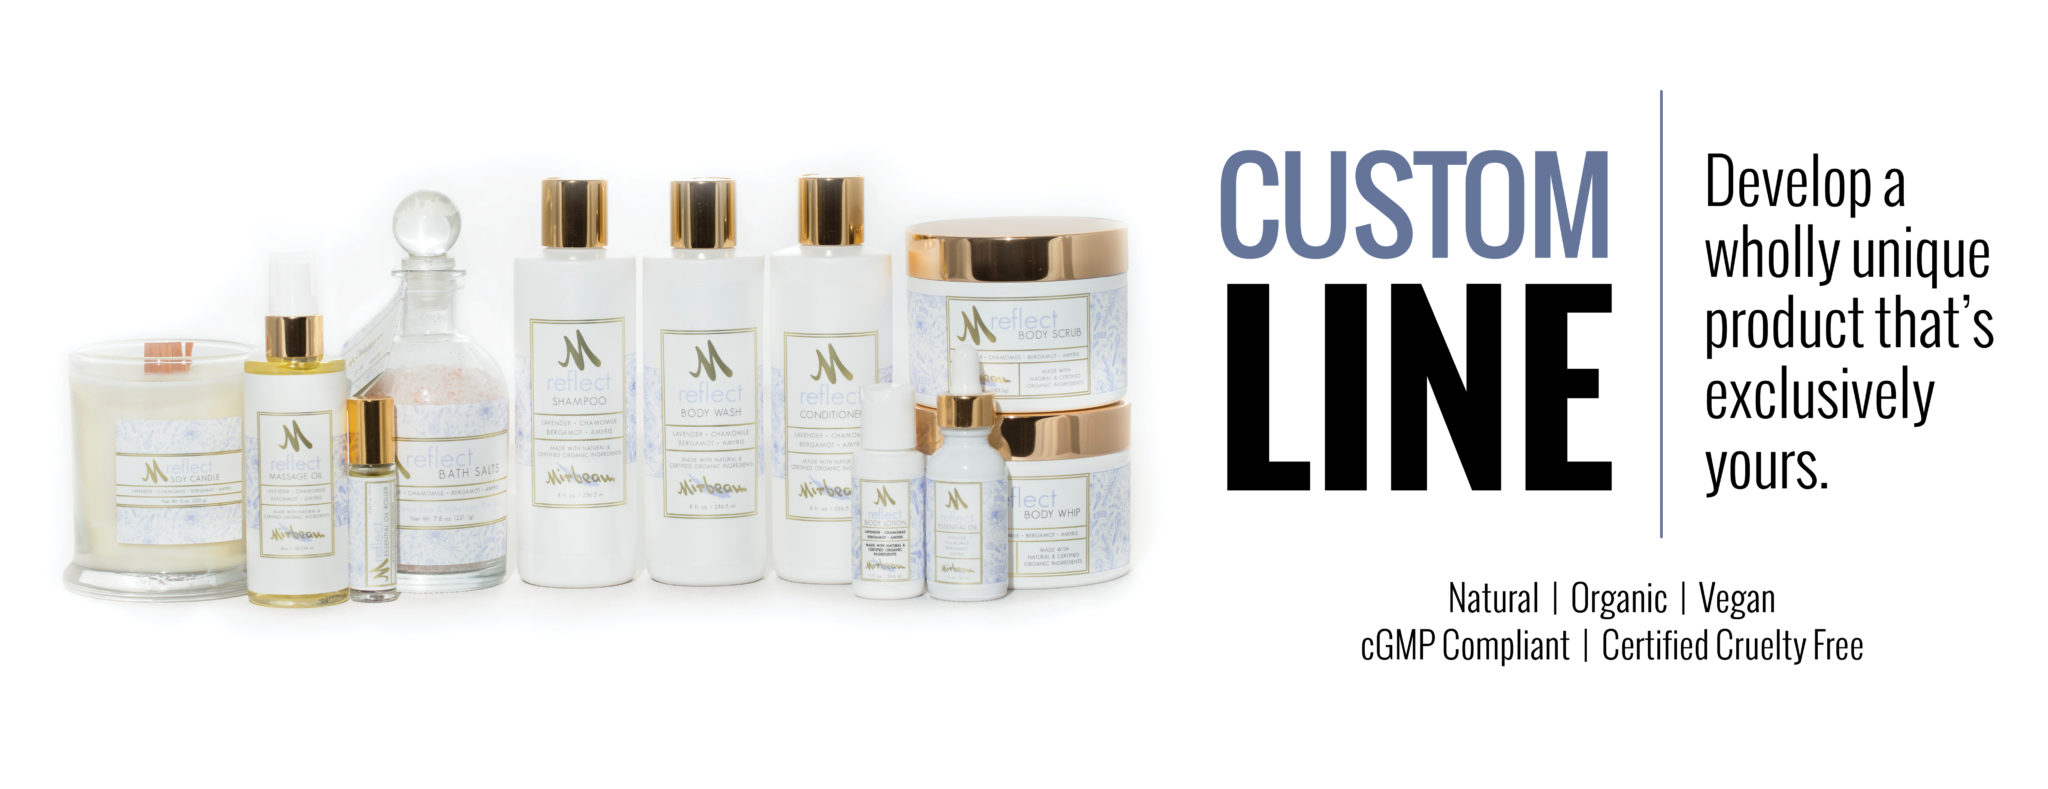 Custom Formulation | Private Label Spa & Room Amenity Products | Makes Scents Natural Spa Line